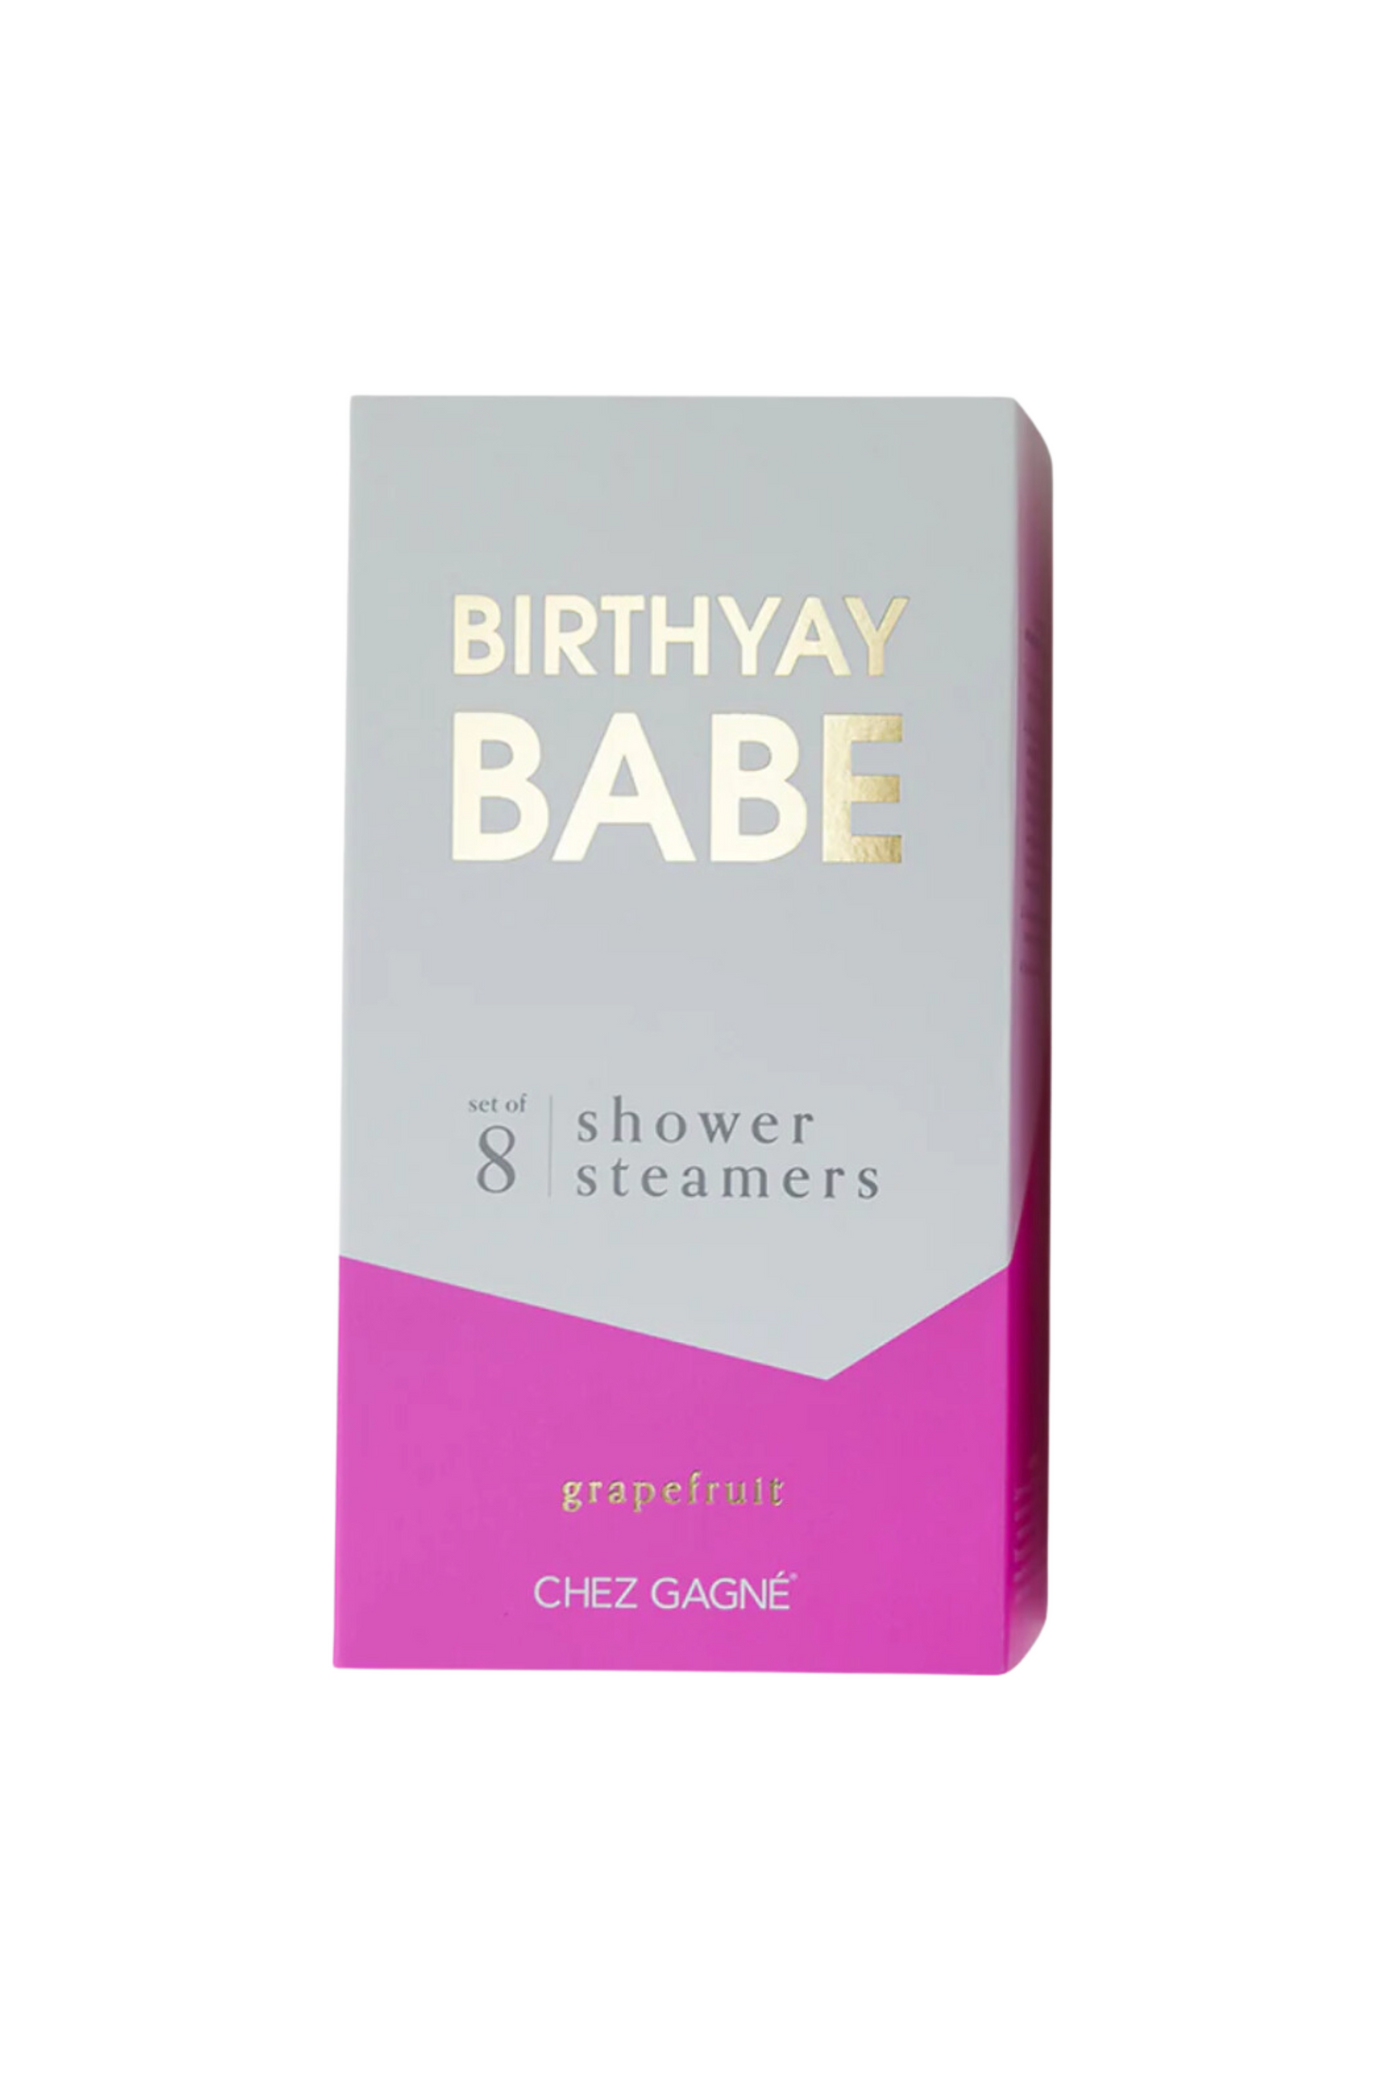 Birthyay Babe Shower Steamers